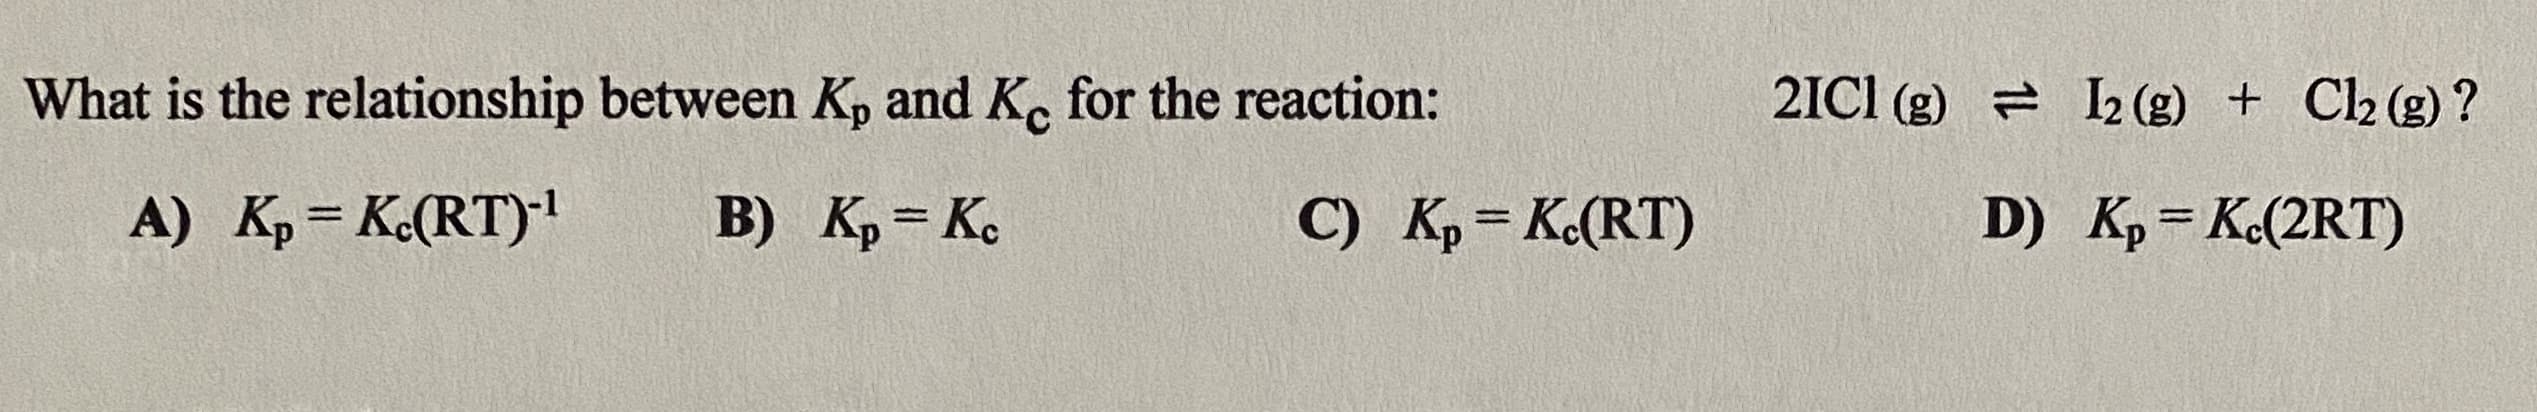 What is the relationship between K, and Ko for the reaction:
2ICI (g) = I2 (g) + Cl2 (g) ?
A) Kp= K«(RT)
B) Kp = Ko
C) K, = K.(RT)
D) K,= K.(2RT)
%3D
